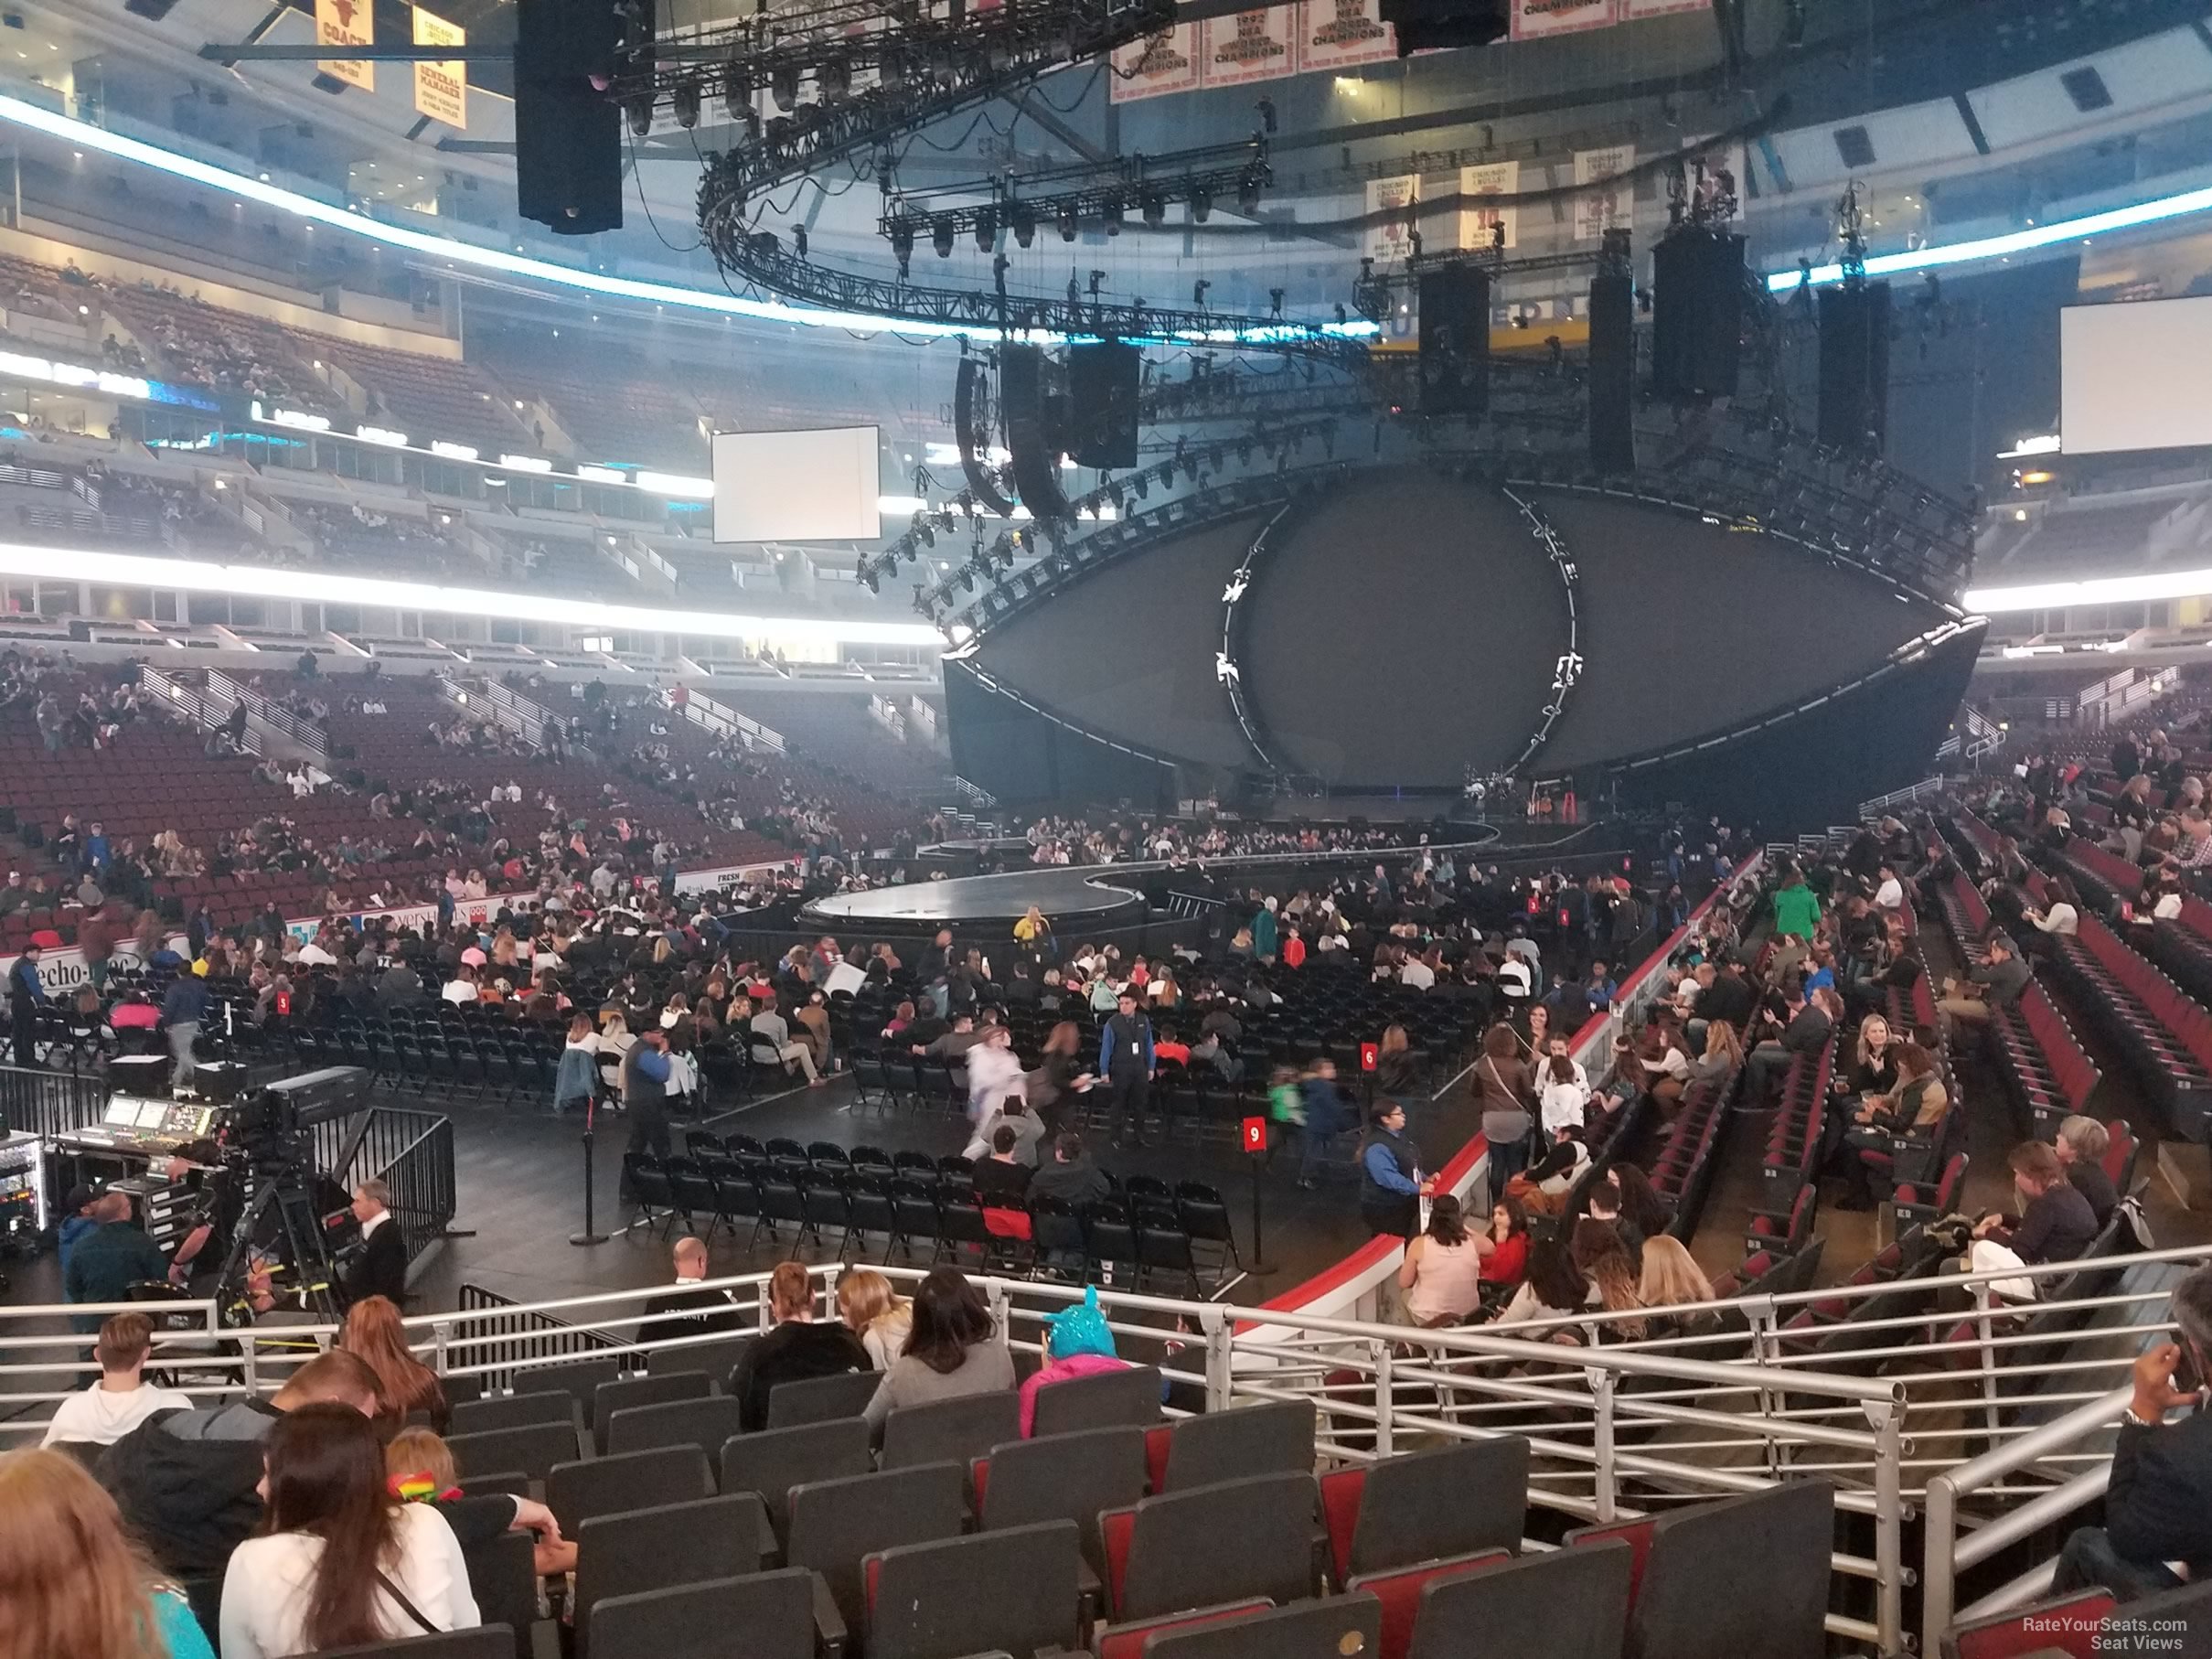 section 104, row 12 seat view  for concert - united center